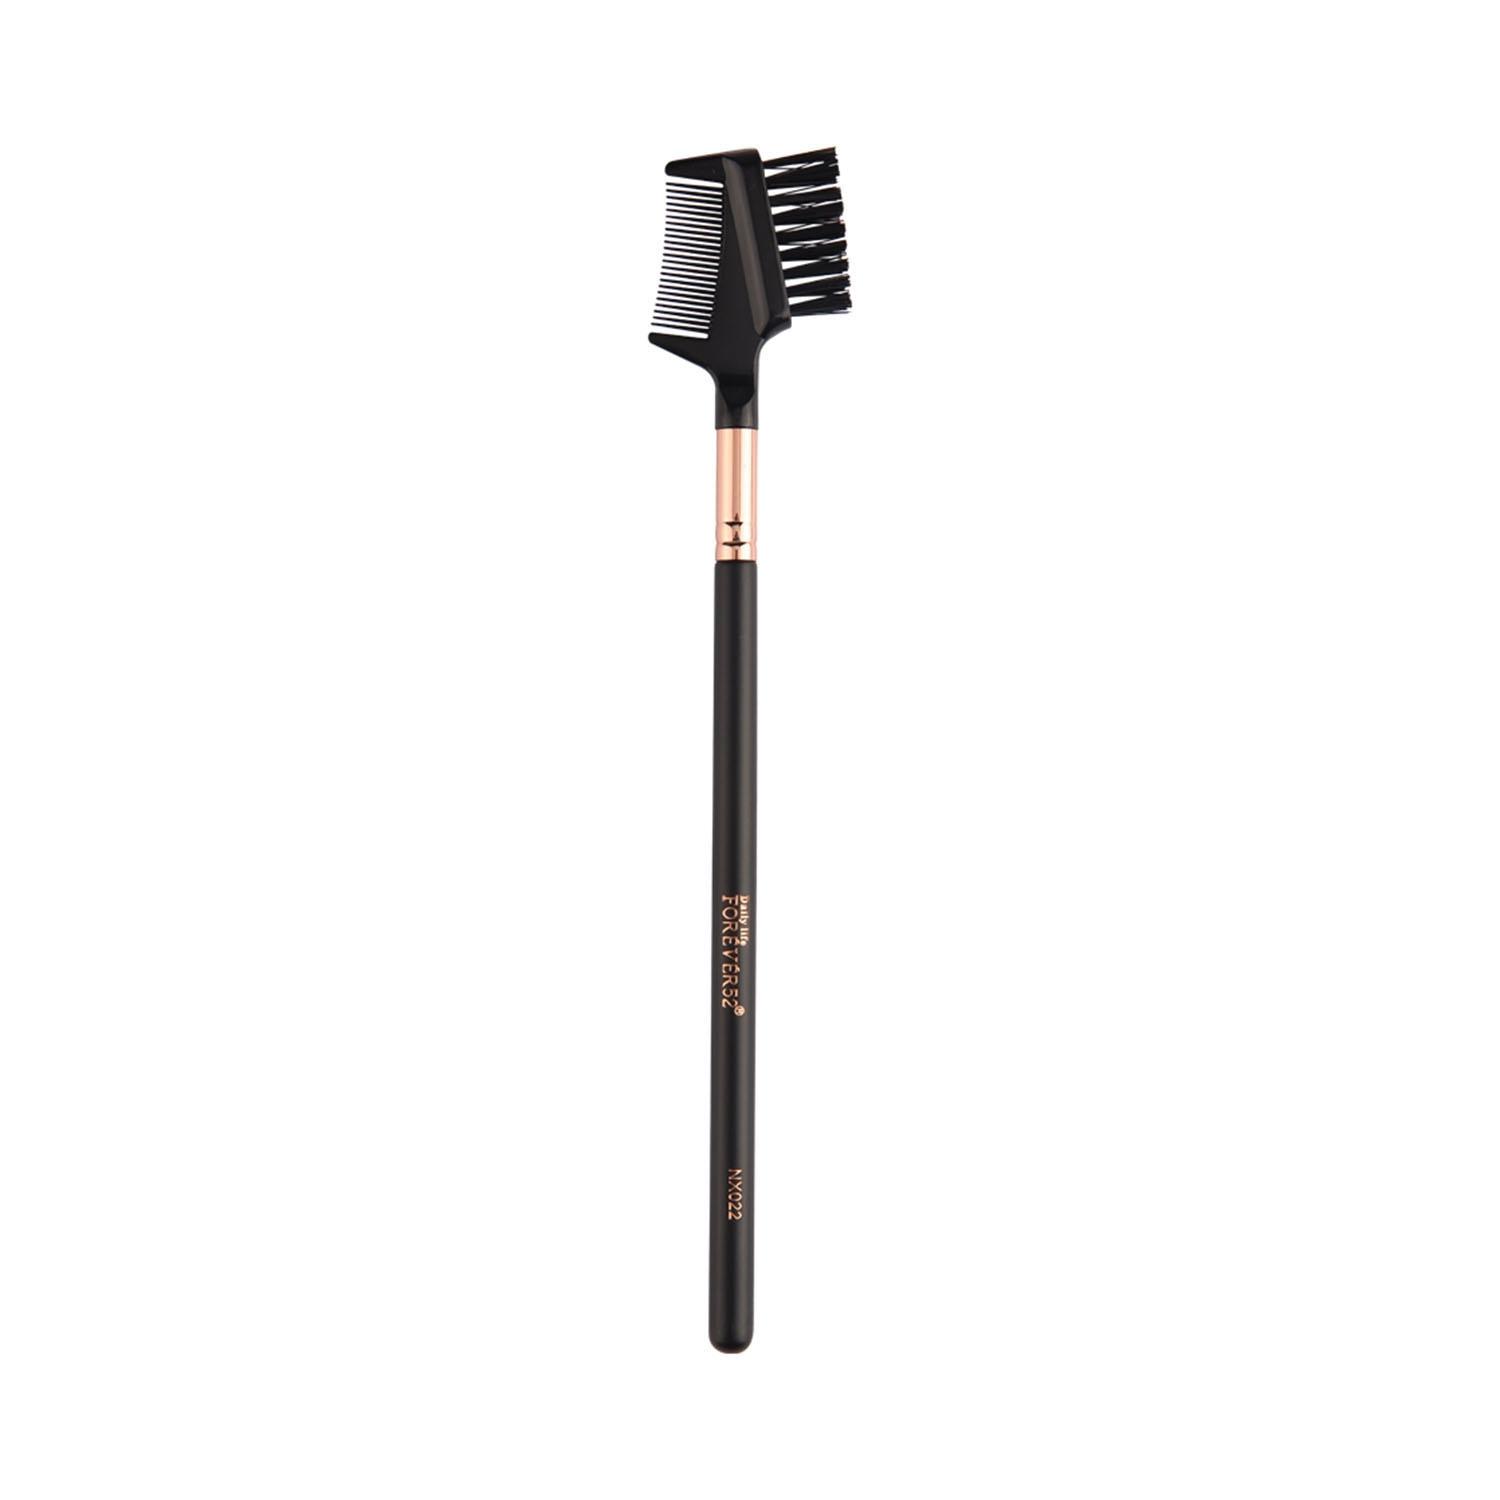 daily life forever52 comb brush - nx022 (1pc)